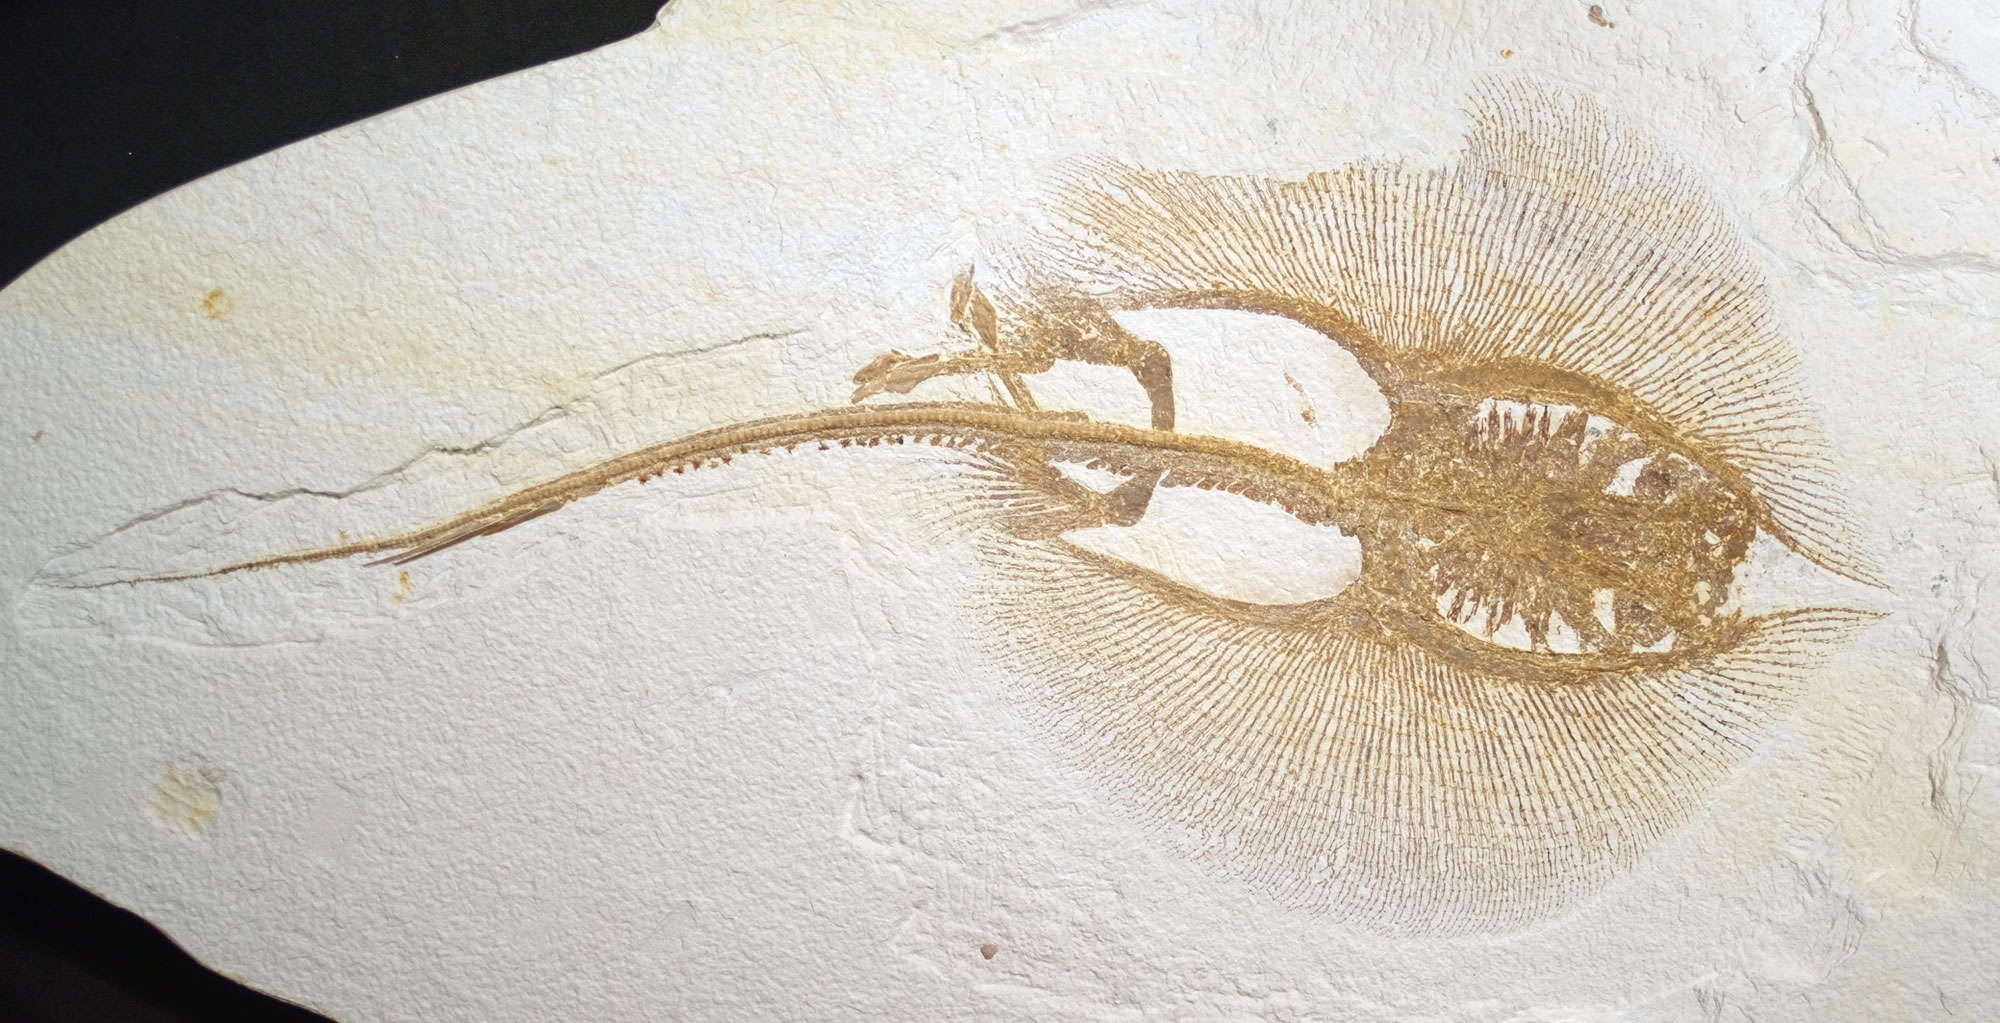 Photograph of a fossil freshwater stingray from Eocene Fossil Lake, Wyoming. The photo shows a nearly complete fossil stingray with its head pointed to the right and its tail to the left. The animal has a roughly circular body with a long tail and pointed snout.